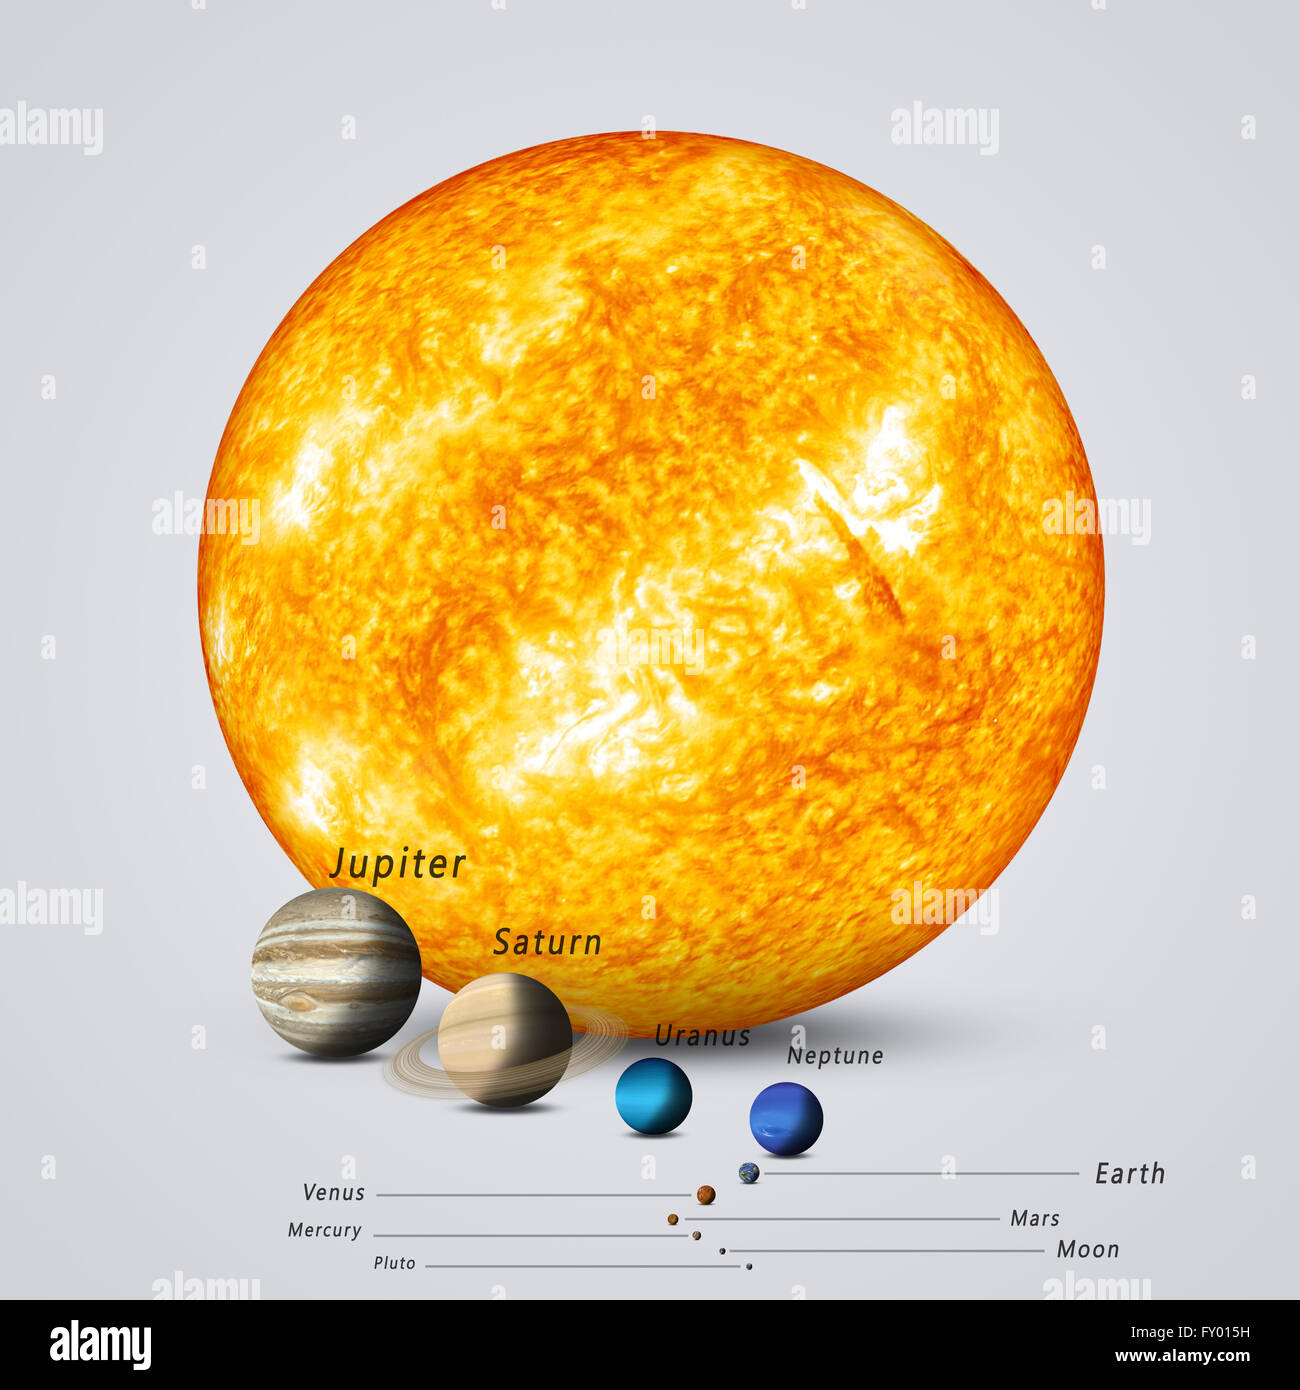 planets bigger than our sun